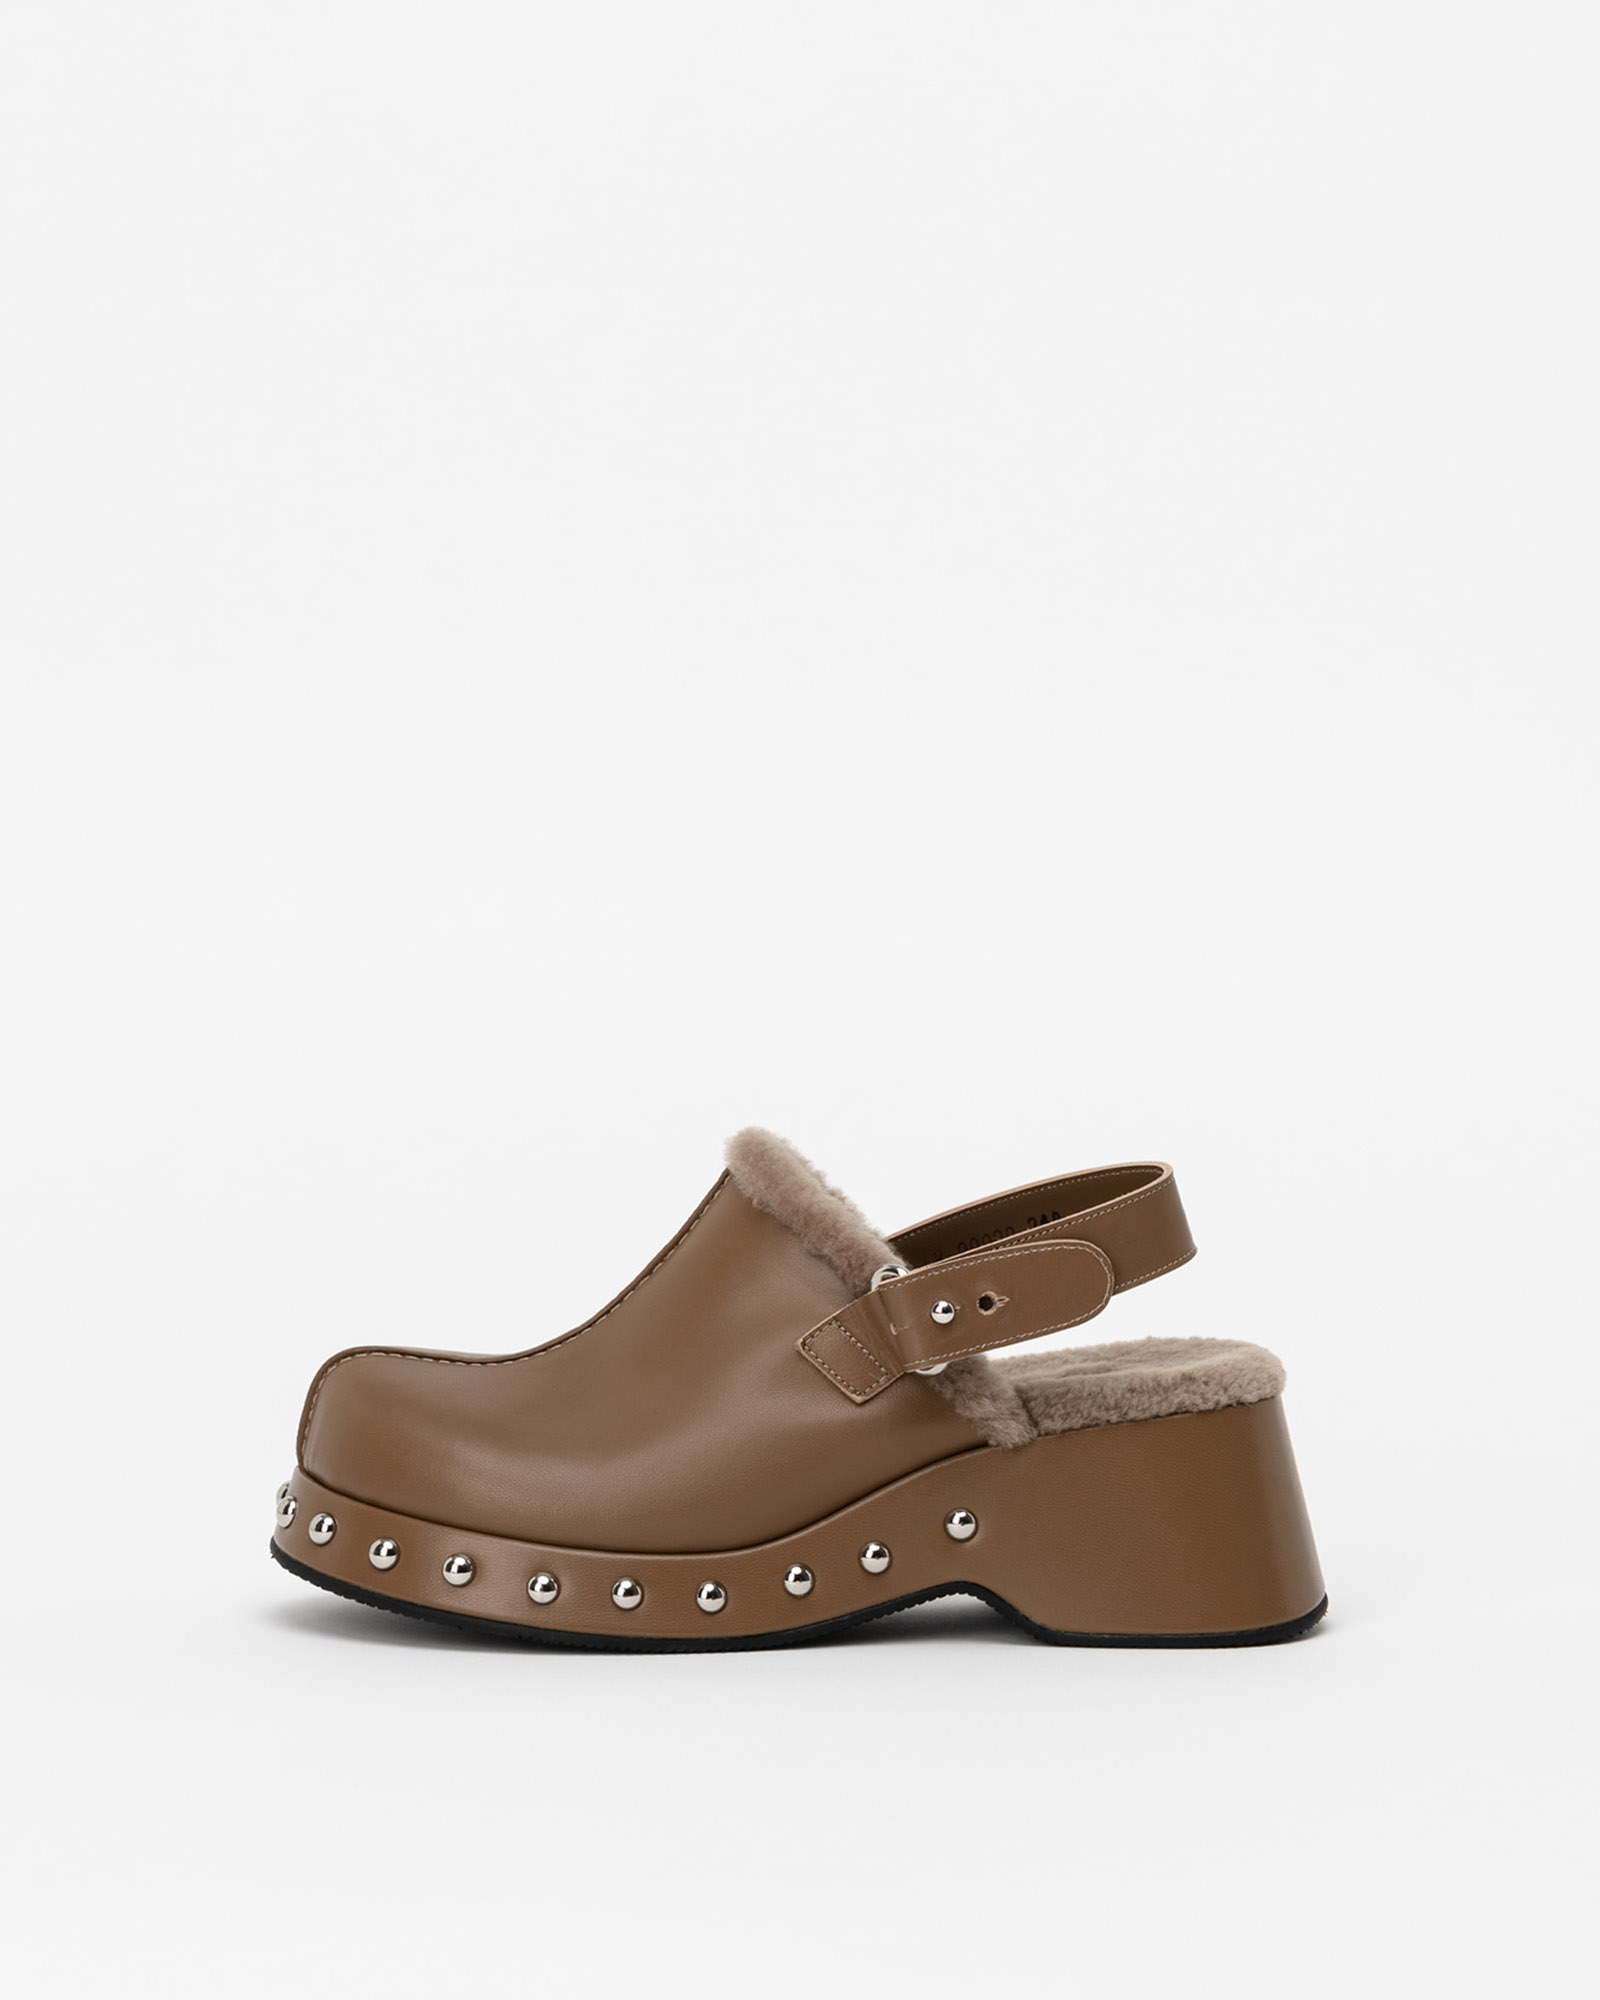 Logger Shearling Clogs in Olive Beige